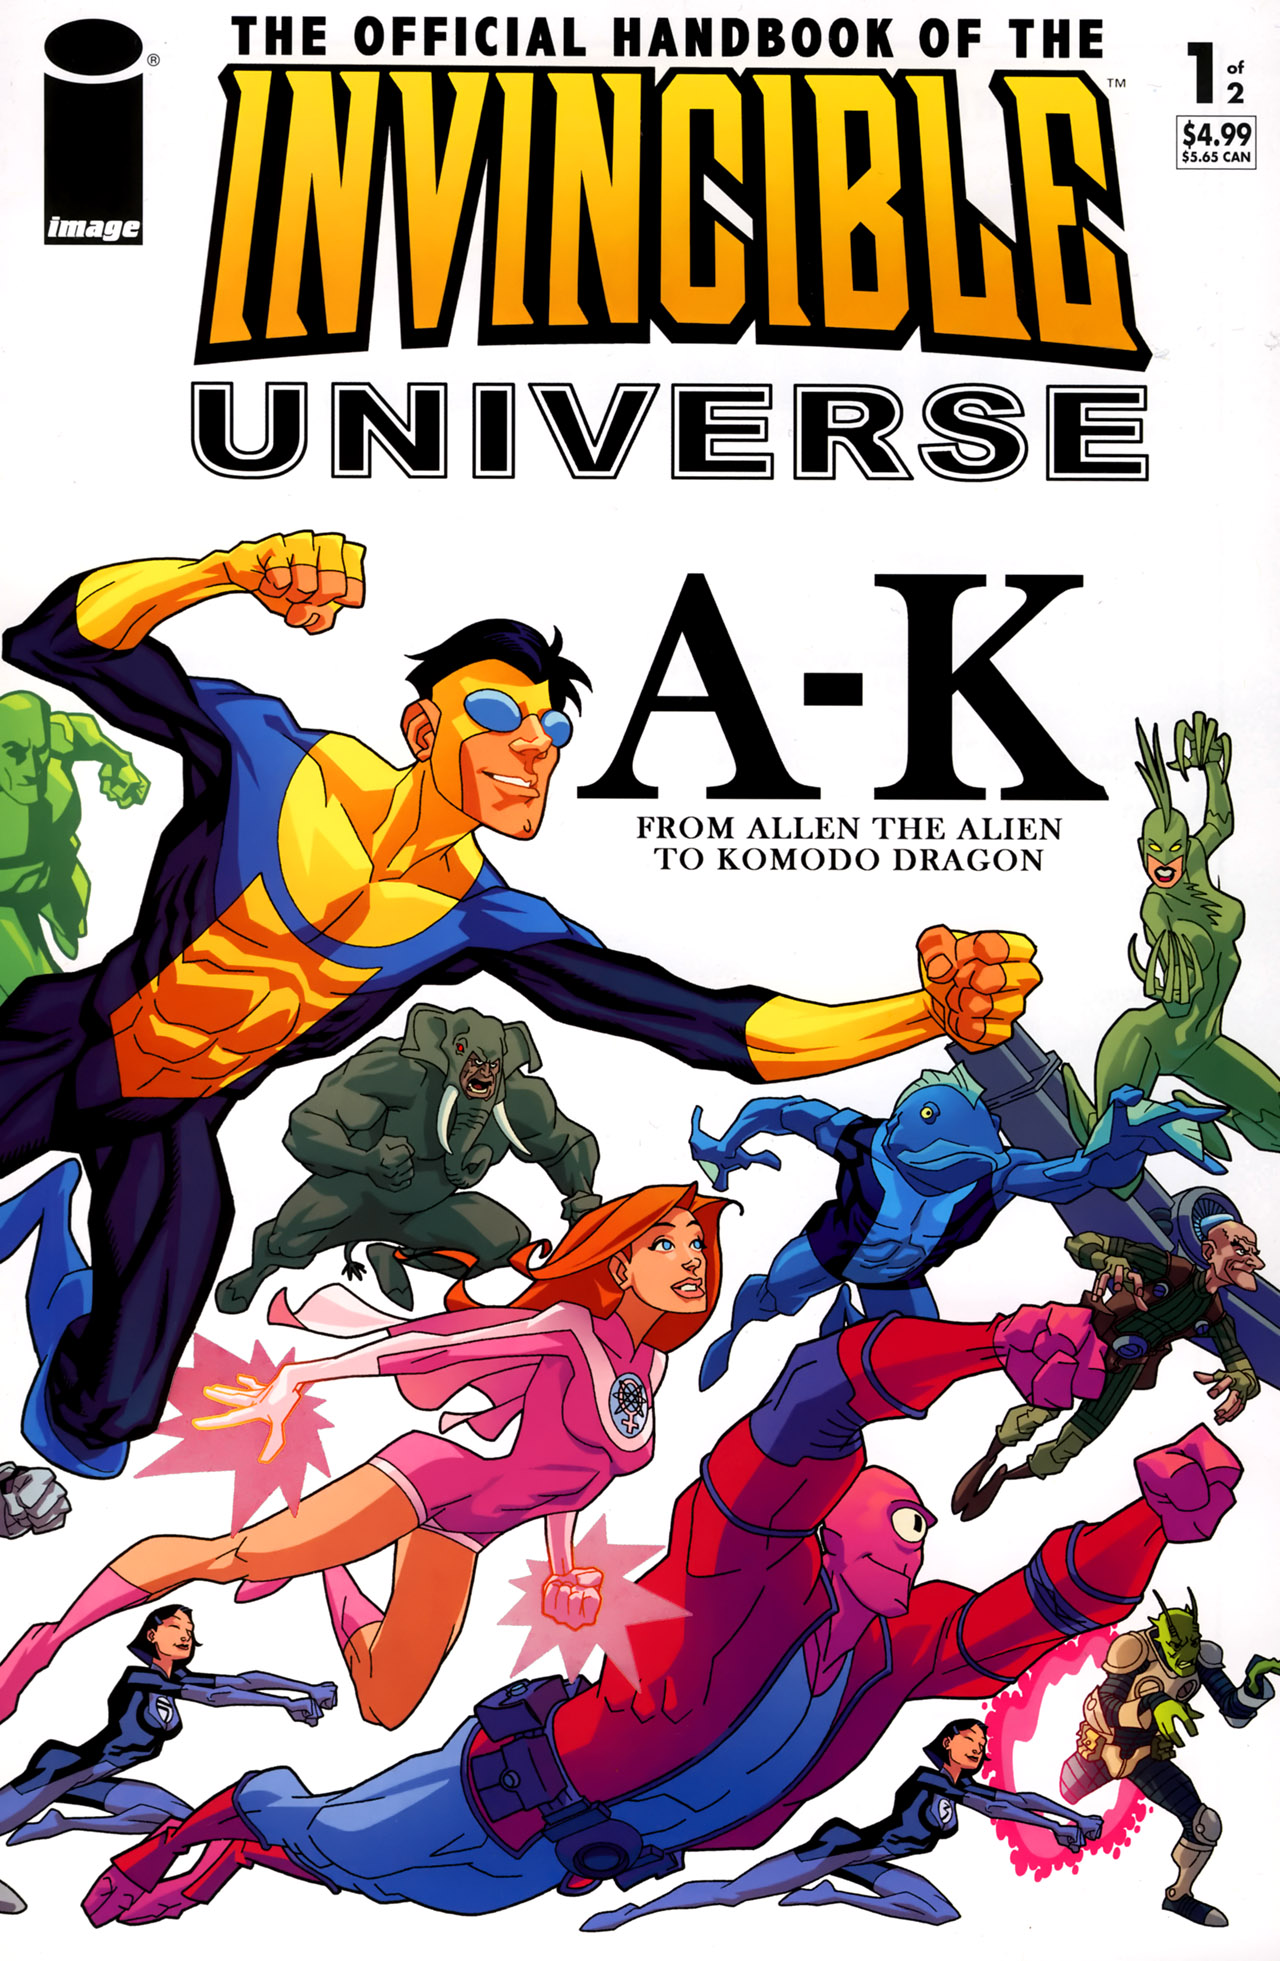 Read online The Official Handbook of the Invincible Universe comic -  Issue #1 - 1